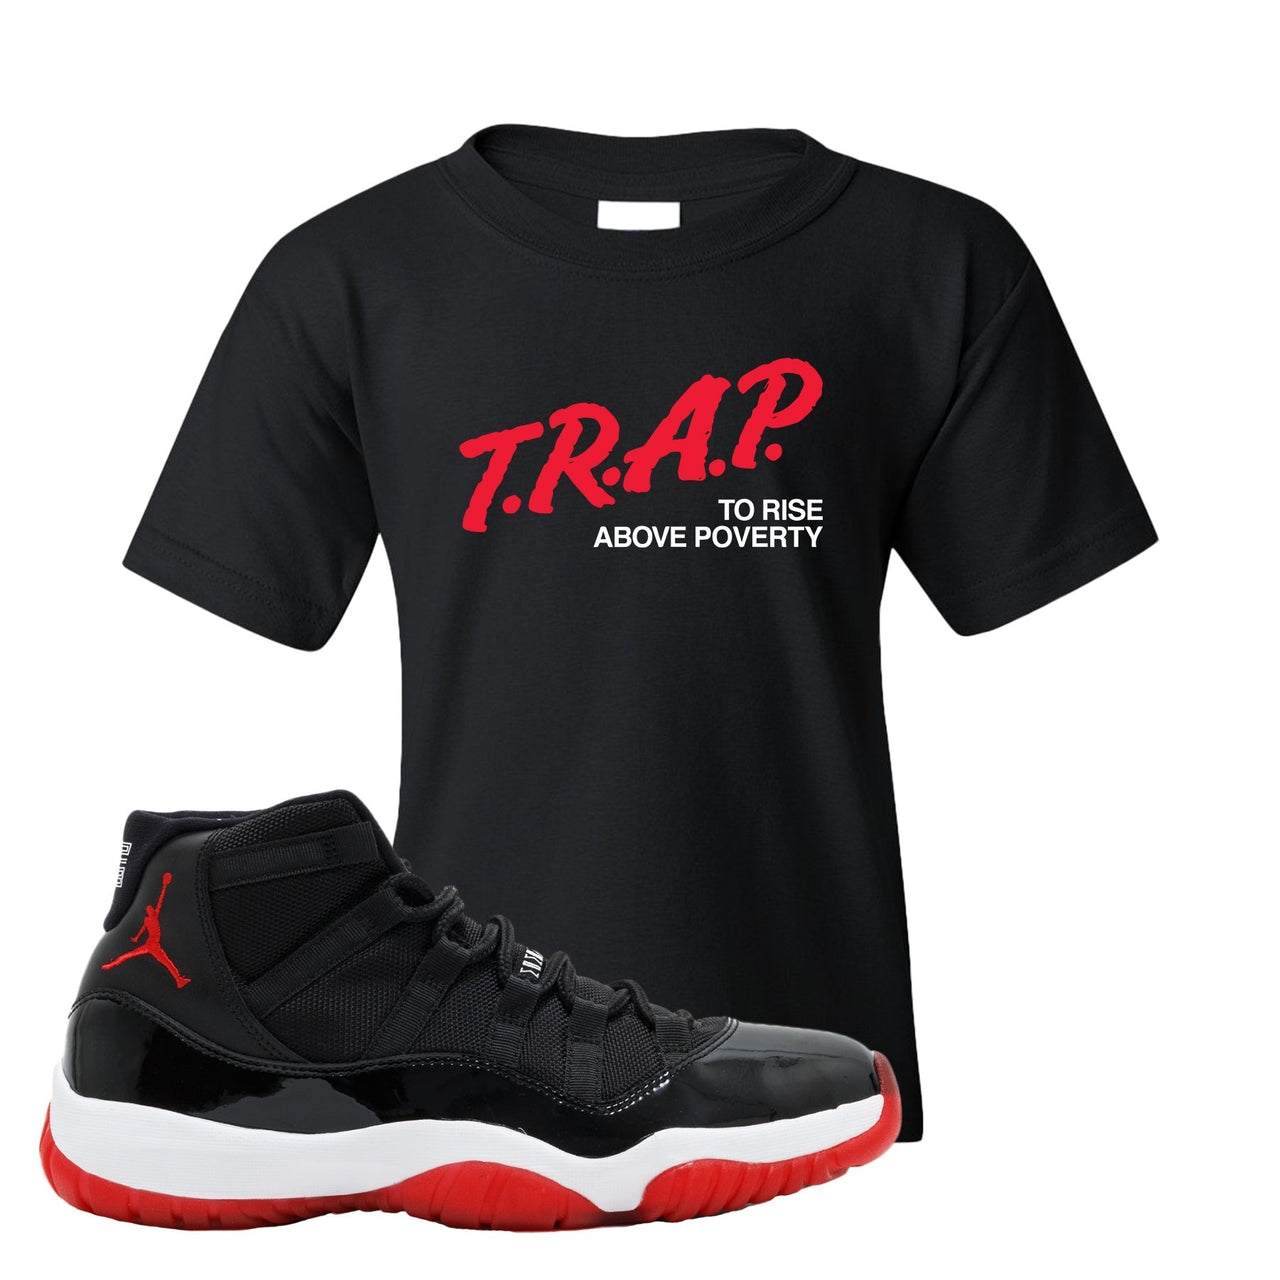 Jordan 11 Bred Trap To Rise Above Poverty Black Sneaker Hook Up Kid's T-Shirt